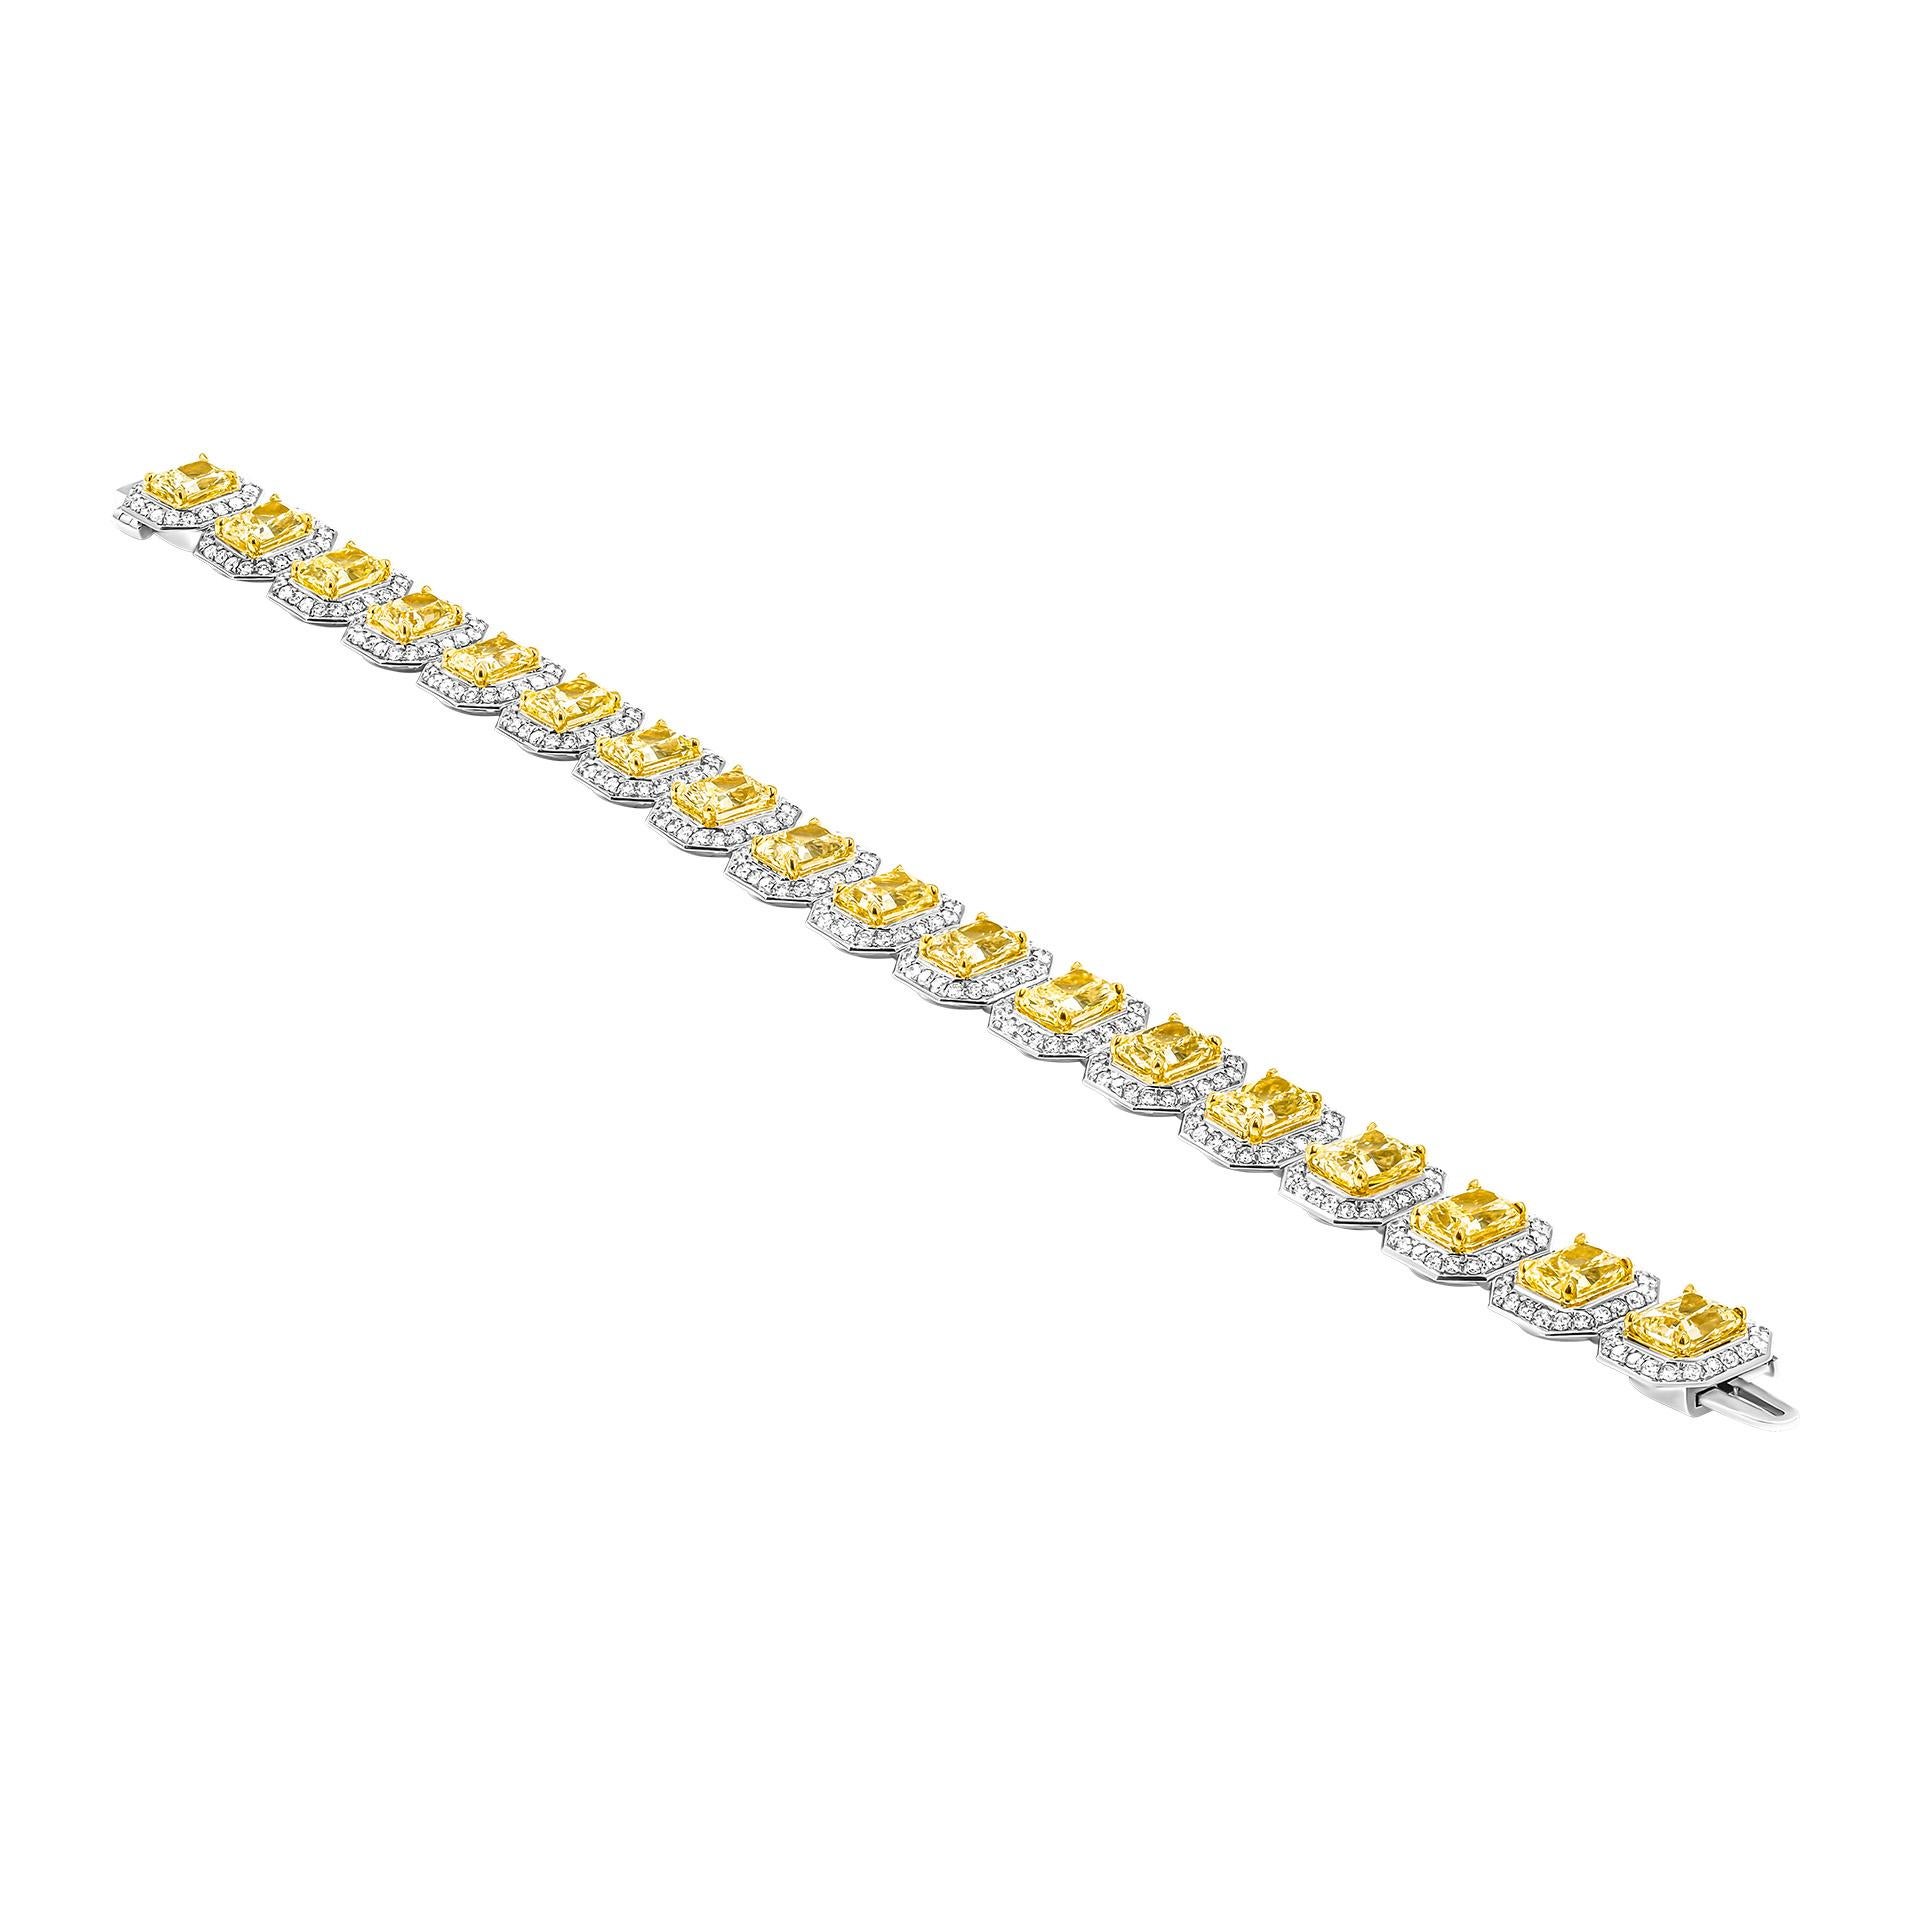 GIA Certified Tennis bracelet in 18k Yellow Gold &Platinum
With white diamond pave totaling 3.39ct
18 stones Radiant cut diamond 
Total Carat Weight: 19.39ct
All stones are GIA Certified :
1.00ct U to V VS1 GIA#6452740770
1.00ct Y to Z VS1